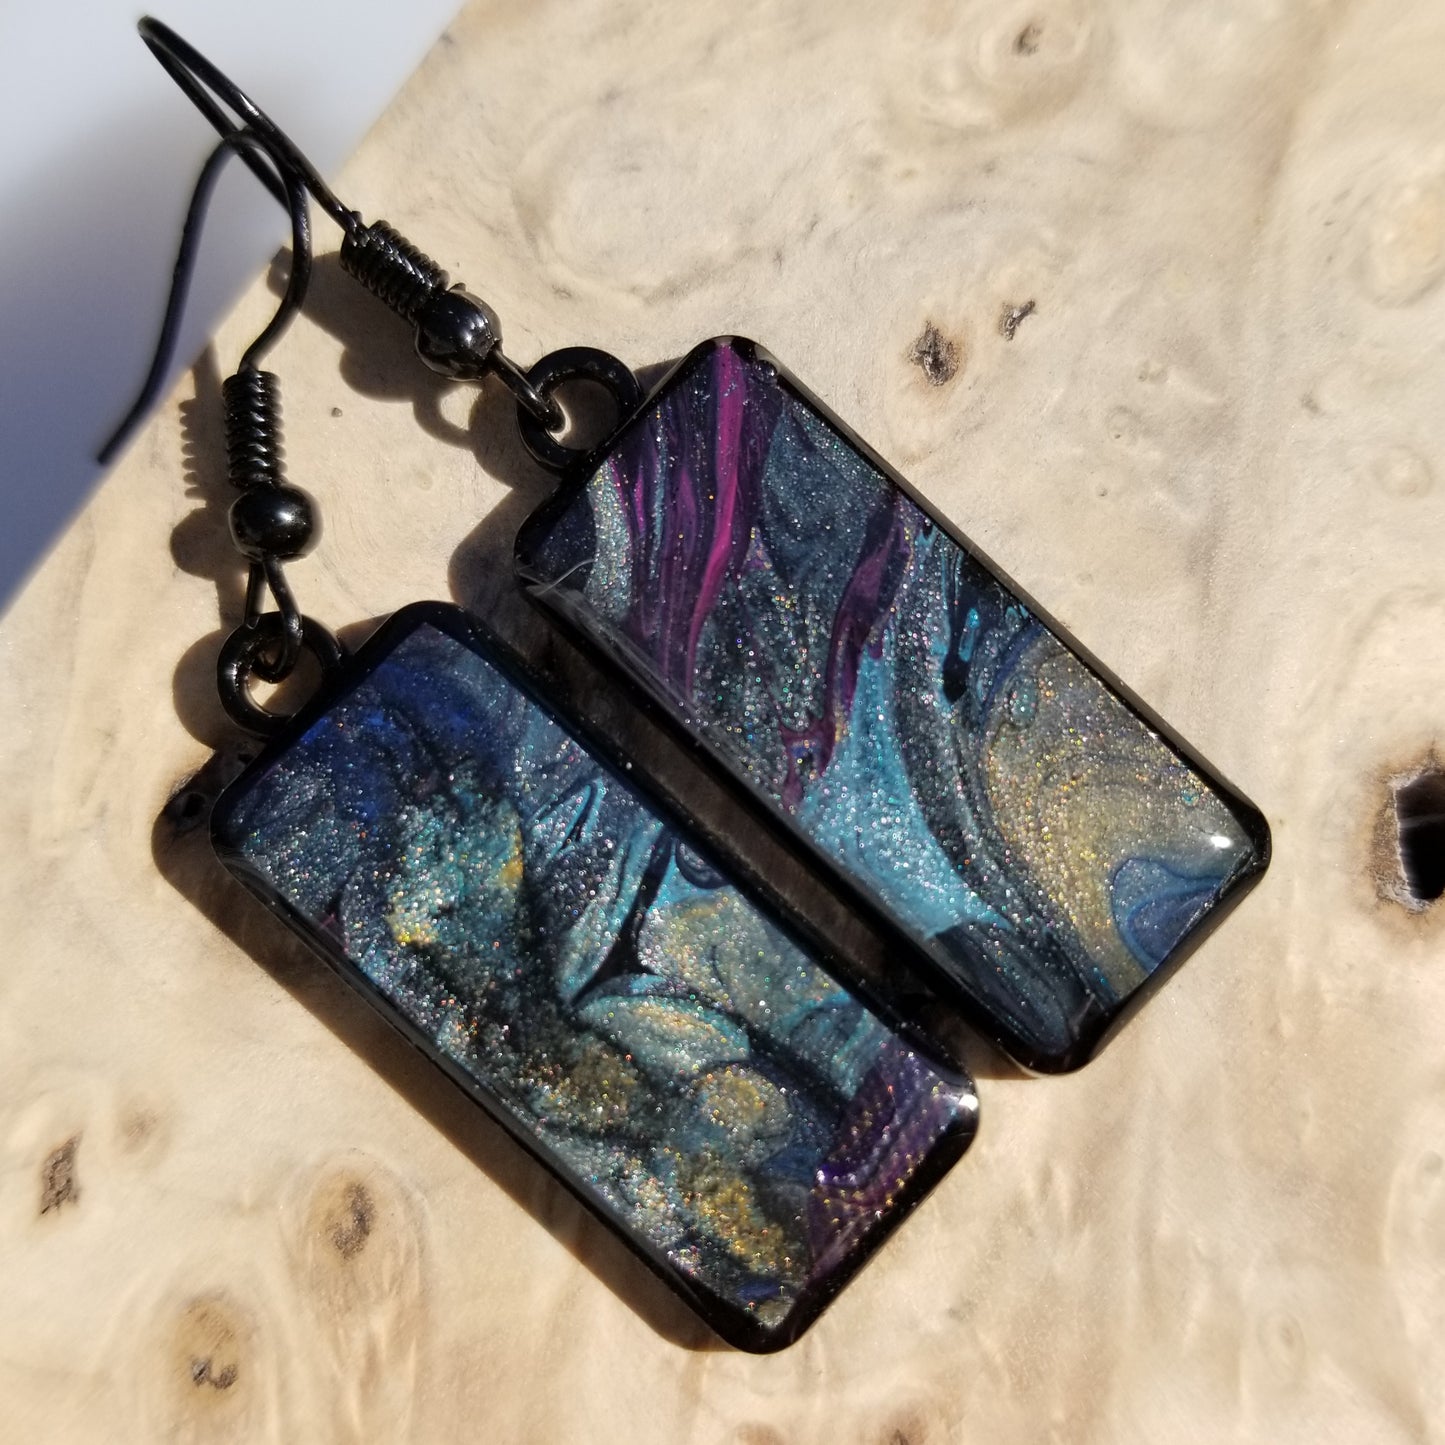 Acrylic Pour Skin with Resin Dome / Silver Tray or Black TrayWire Hook Earrings